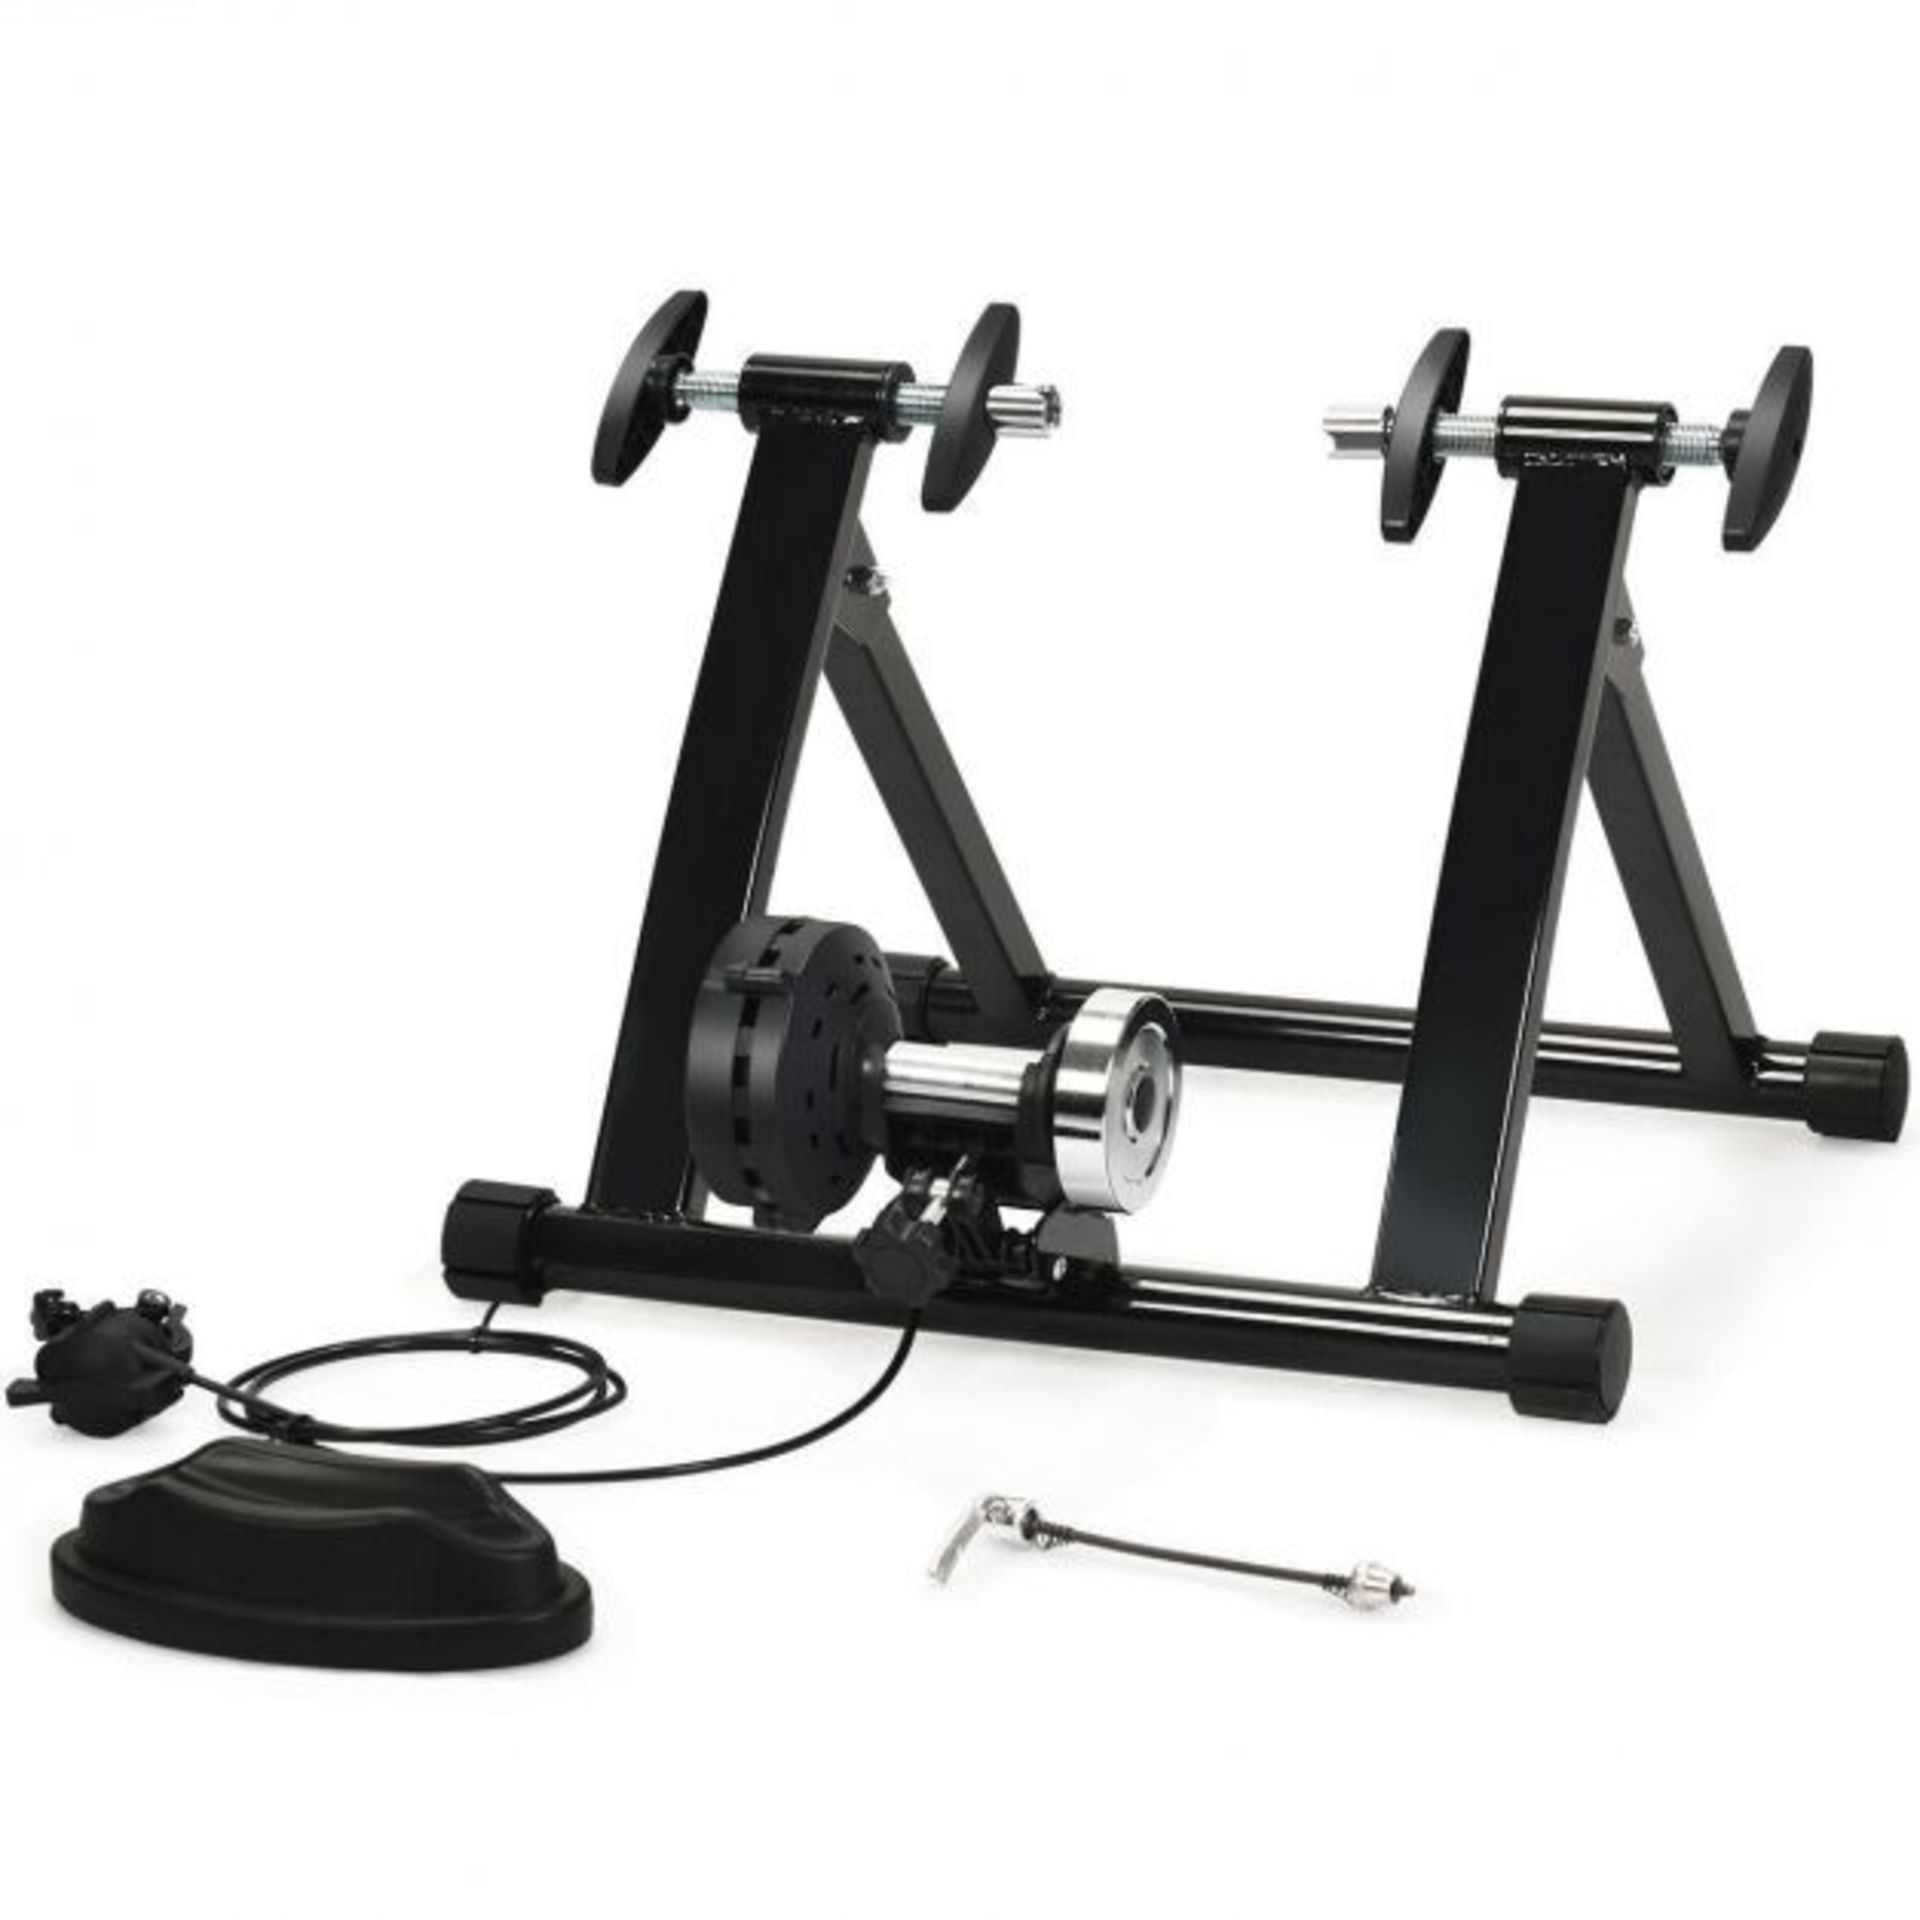 Indoor Bicycle Trainer Stand with 8 Resistance Levels. - ER26. When the weather is grim but you need